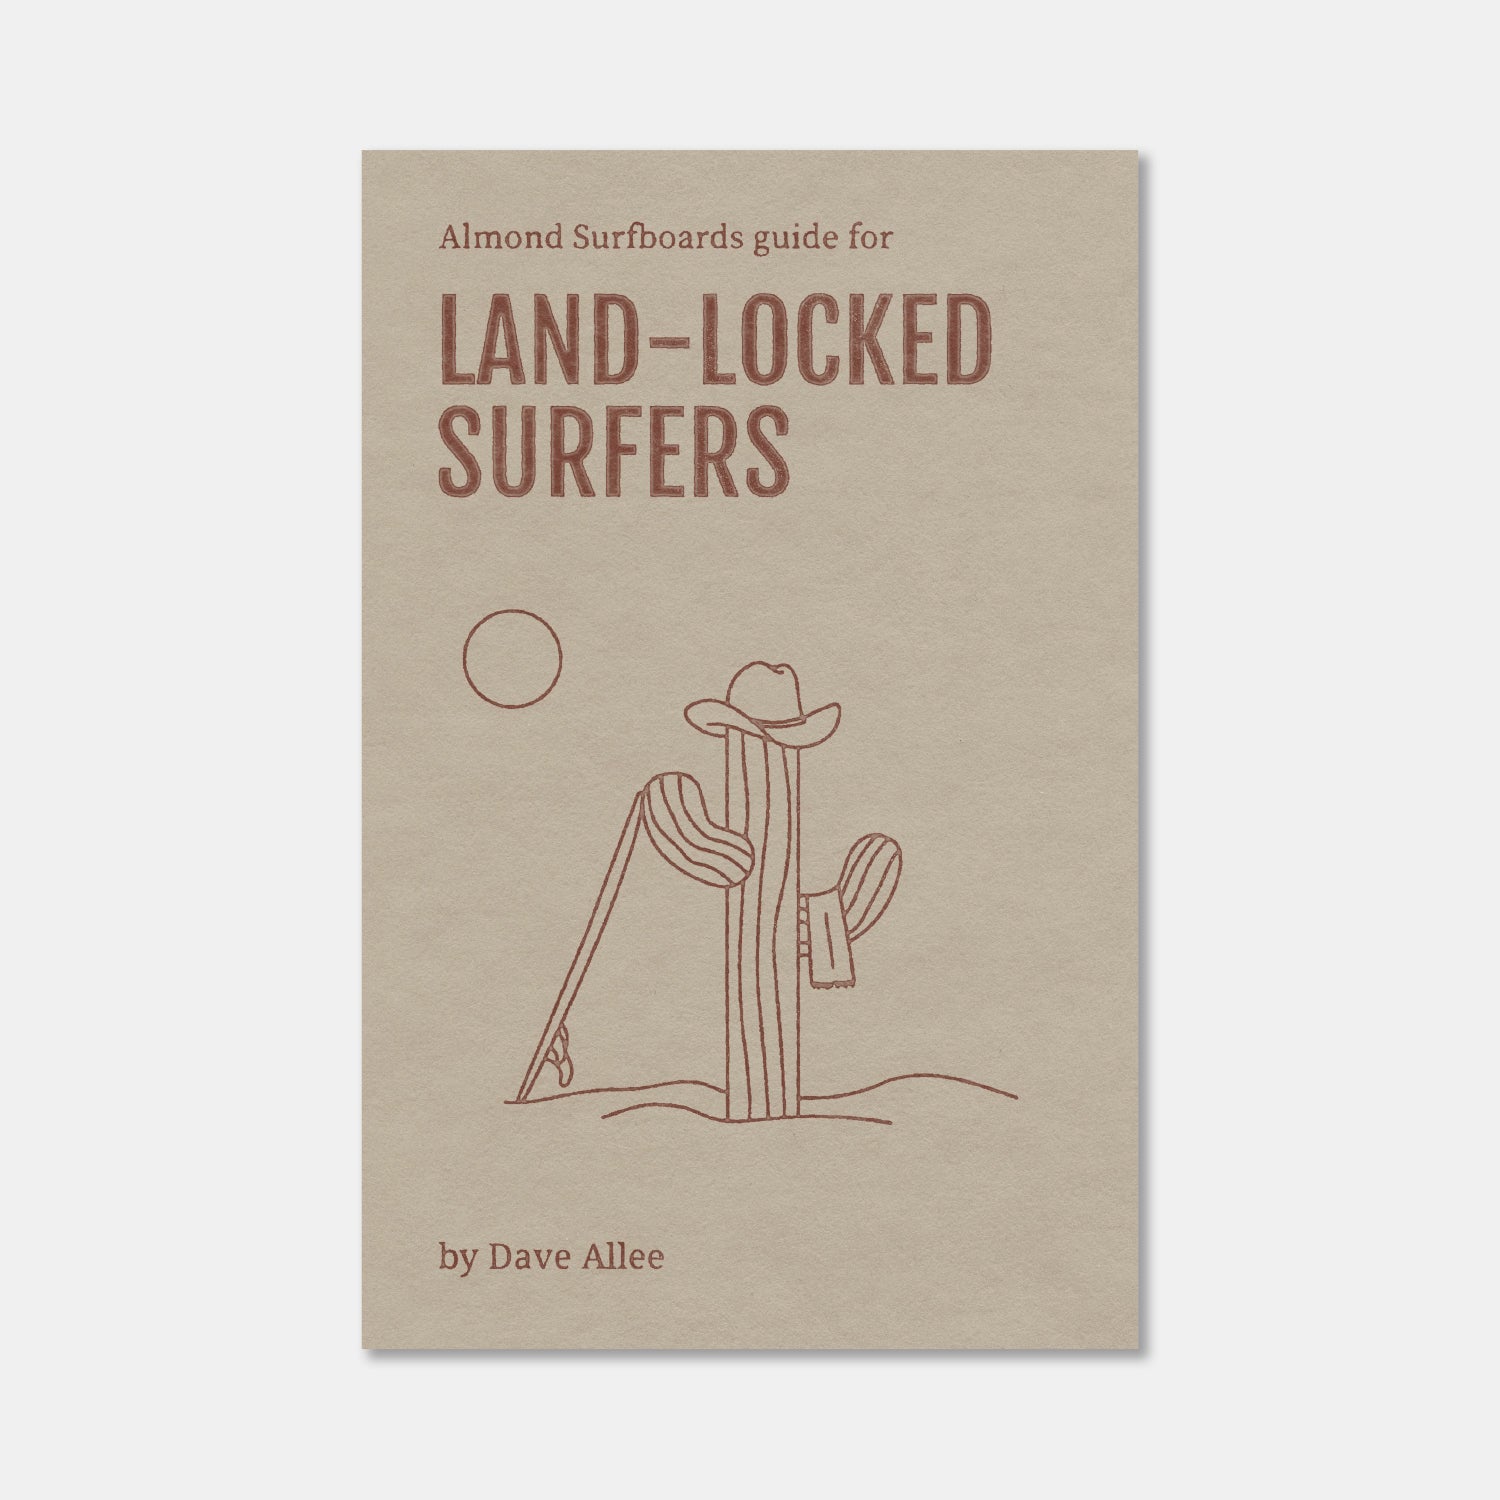 Almond's Guide for Land-Locked Surfers (Paperback)